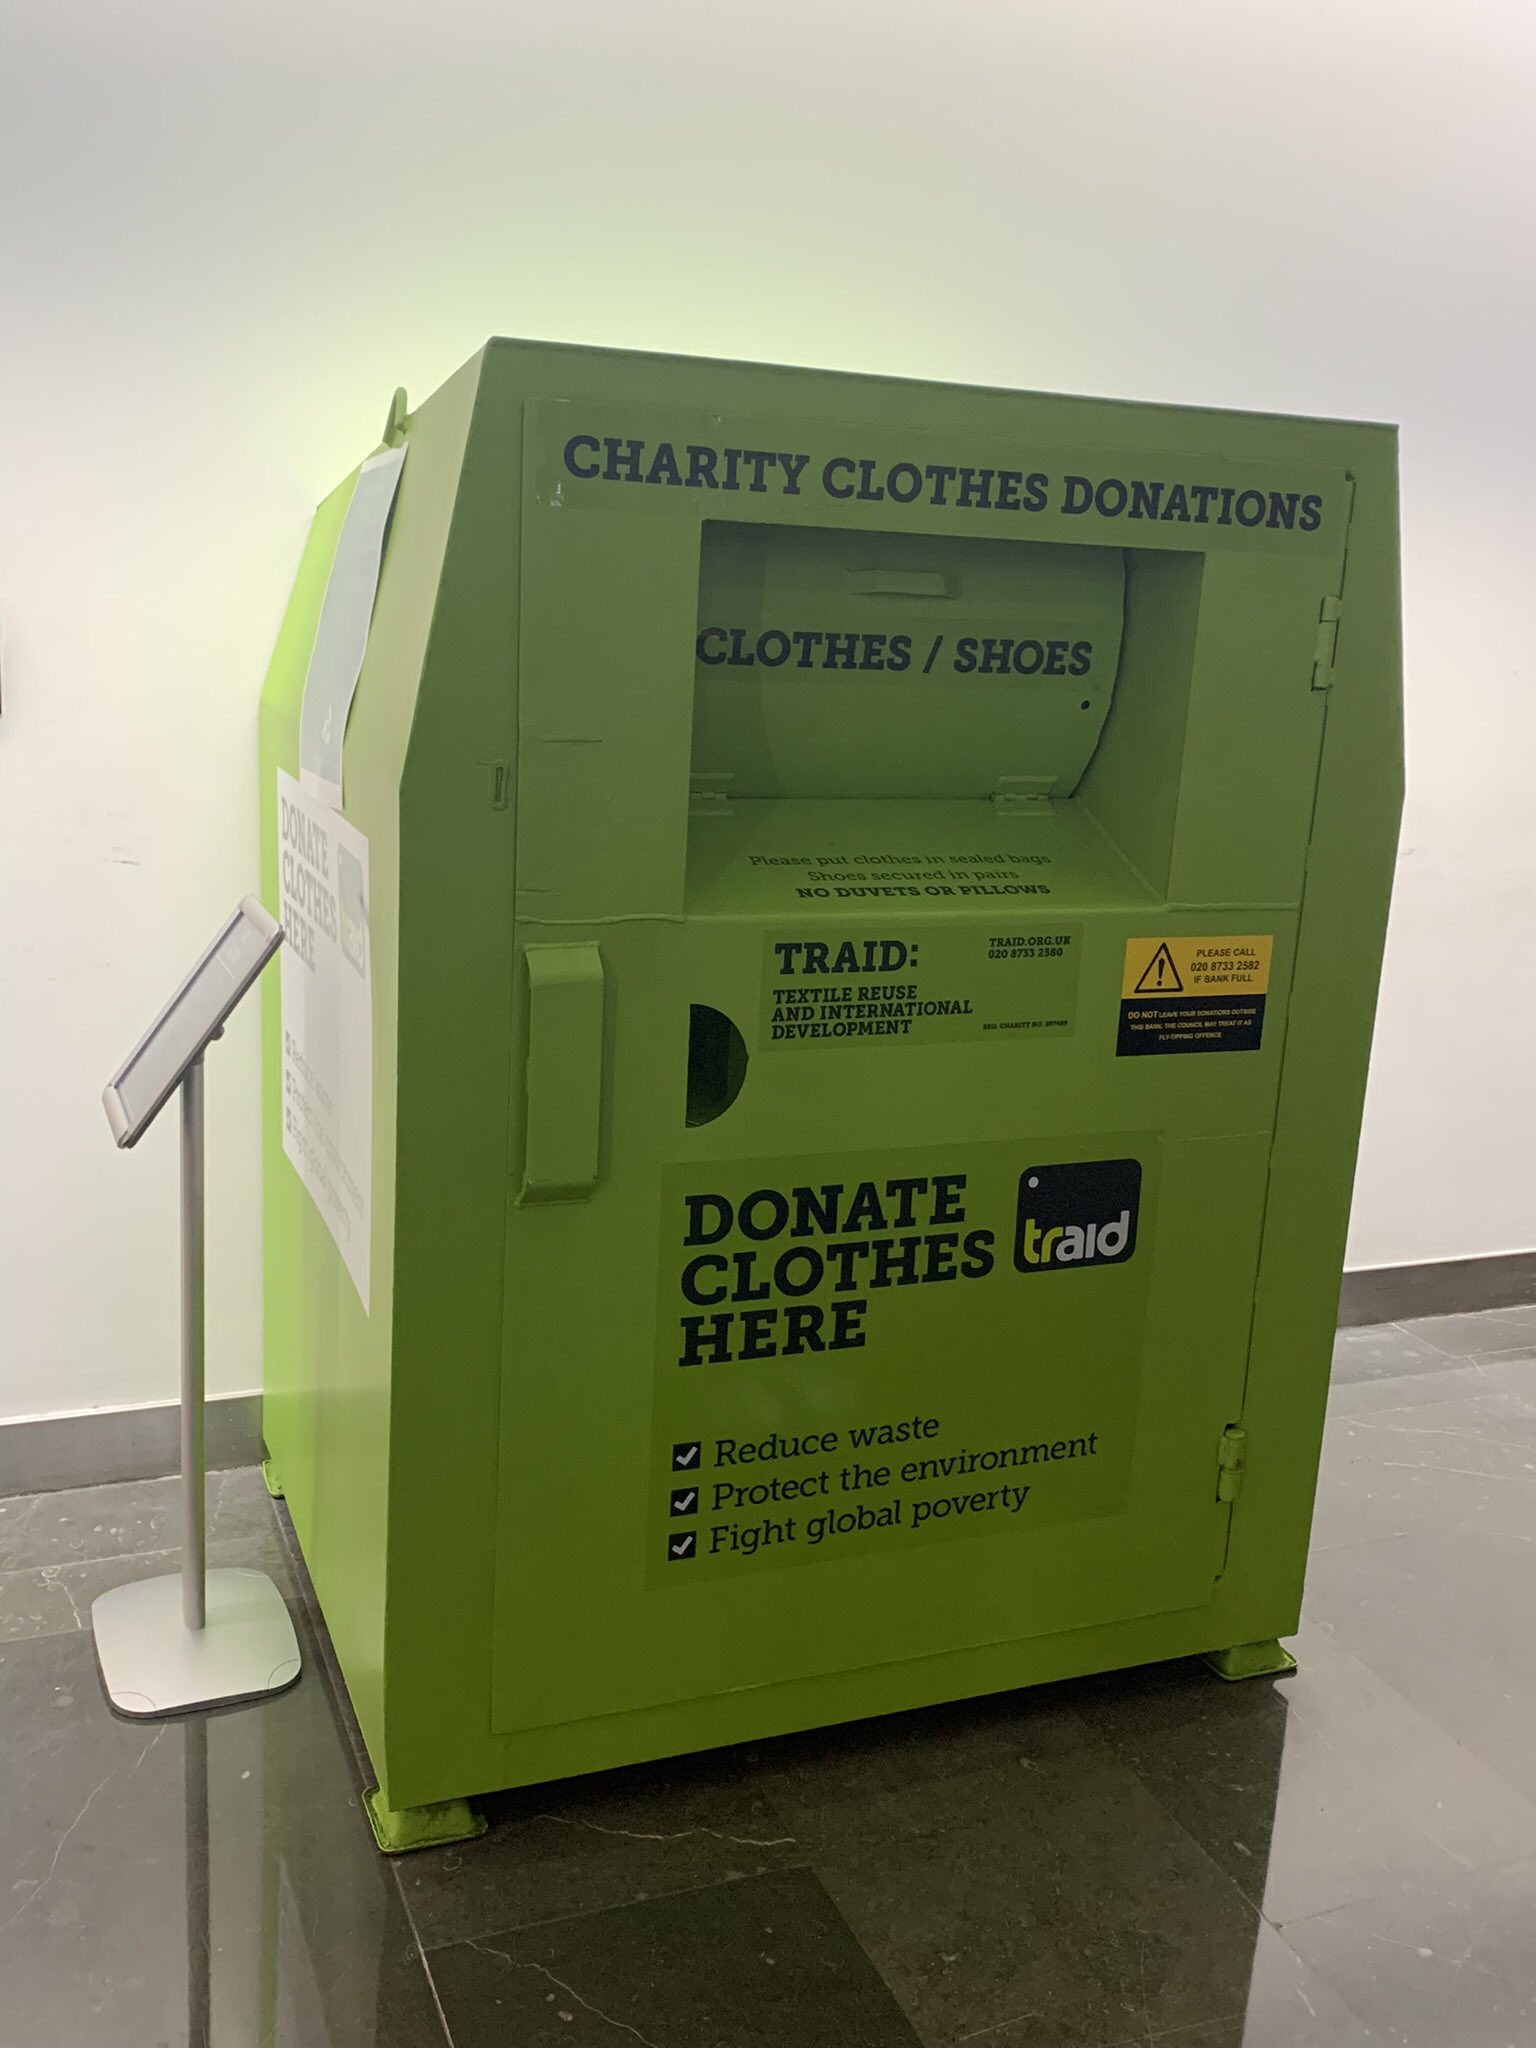 Bywaters on Twitter: "We're proud to announce that we have partnered with @TRAID to install our first Charity clothes bin at @CBRE Thames Court! All clean and wearable clothes donated, are reused